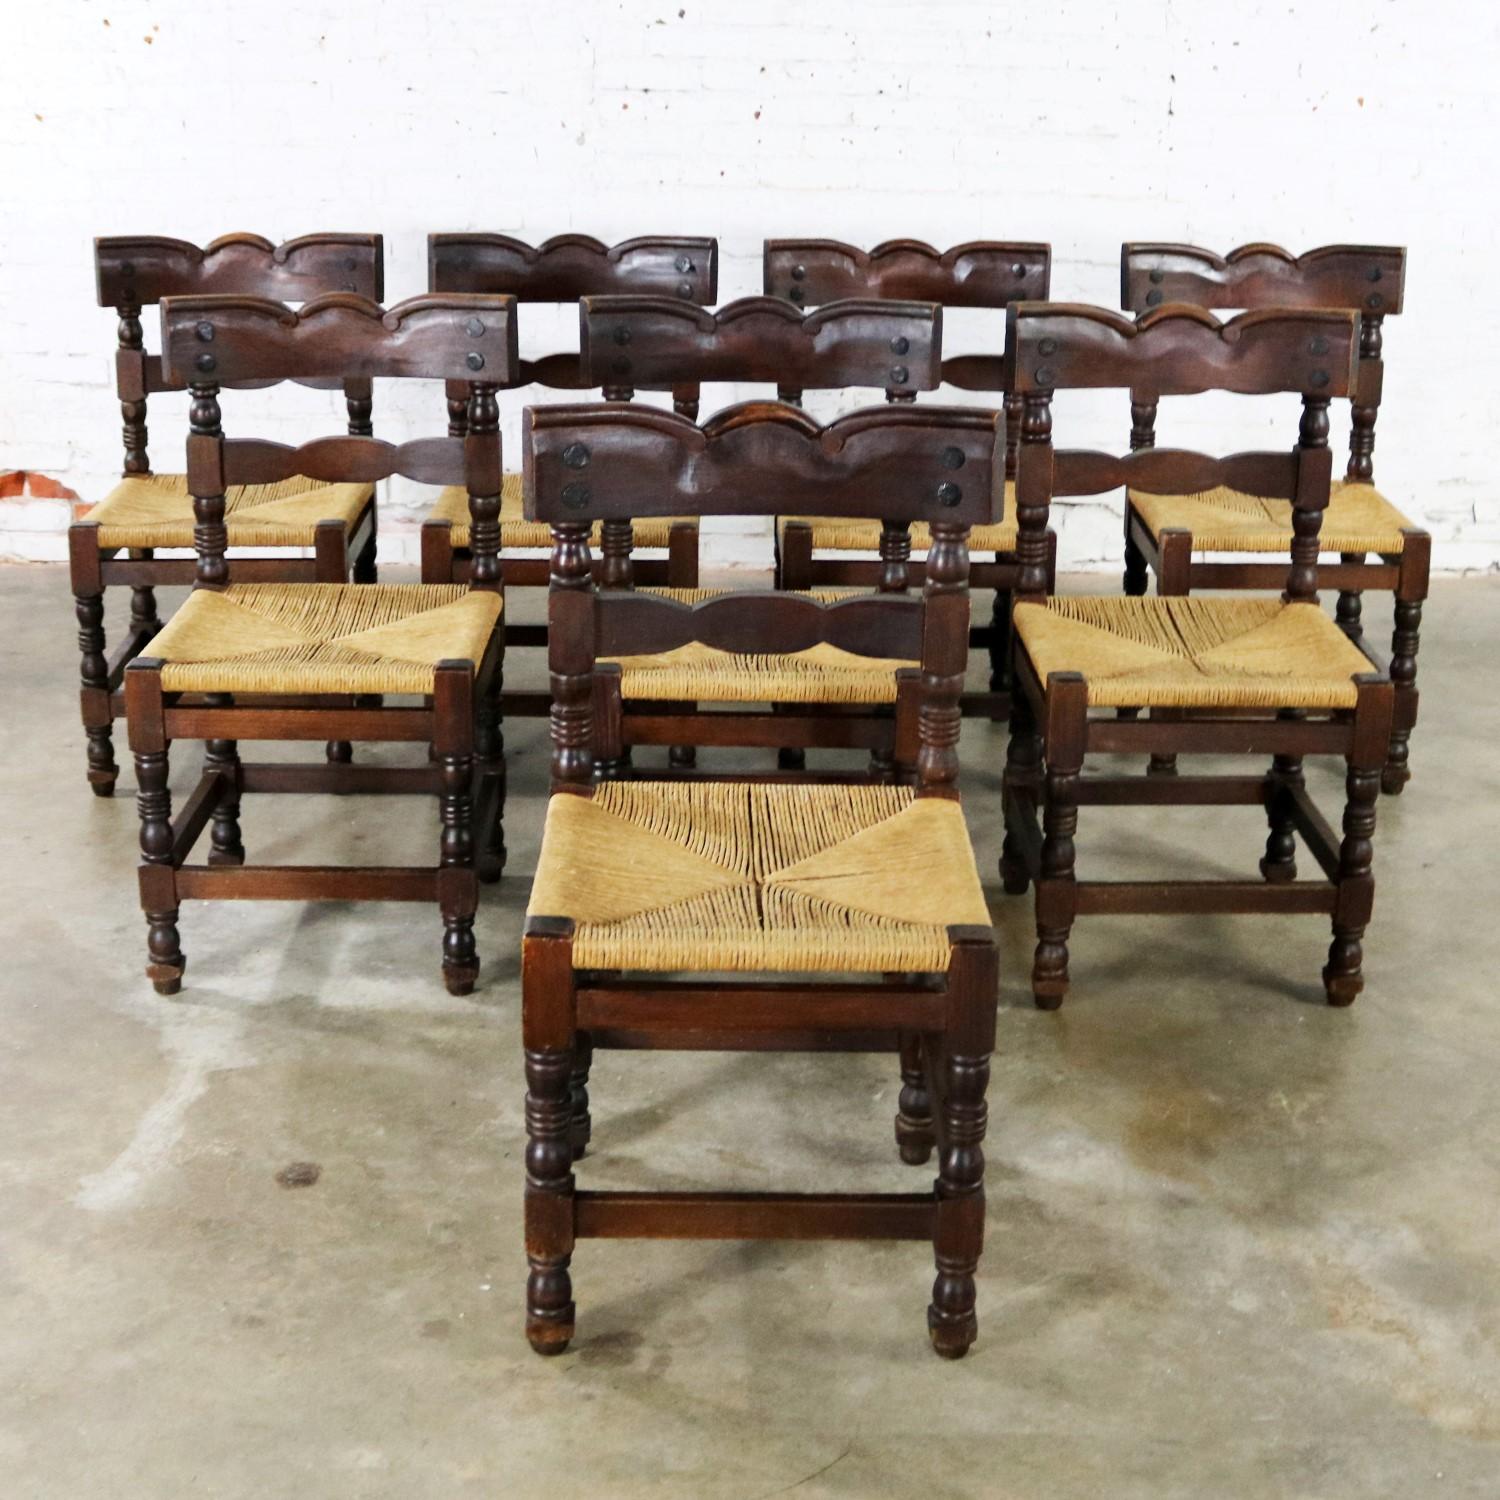 Handsome Spanish Colonial or Spanish Revival style dining chairs with natural rush seats and large nailhead detail. Stamped with a black oval marking with Hecho en Mexico. They are in wonderful vintage condition with lots of beautiful age patina